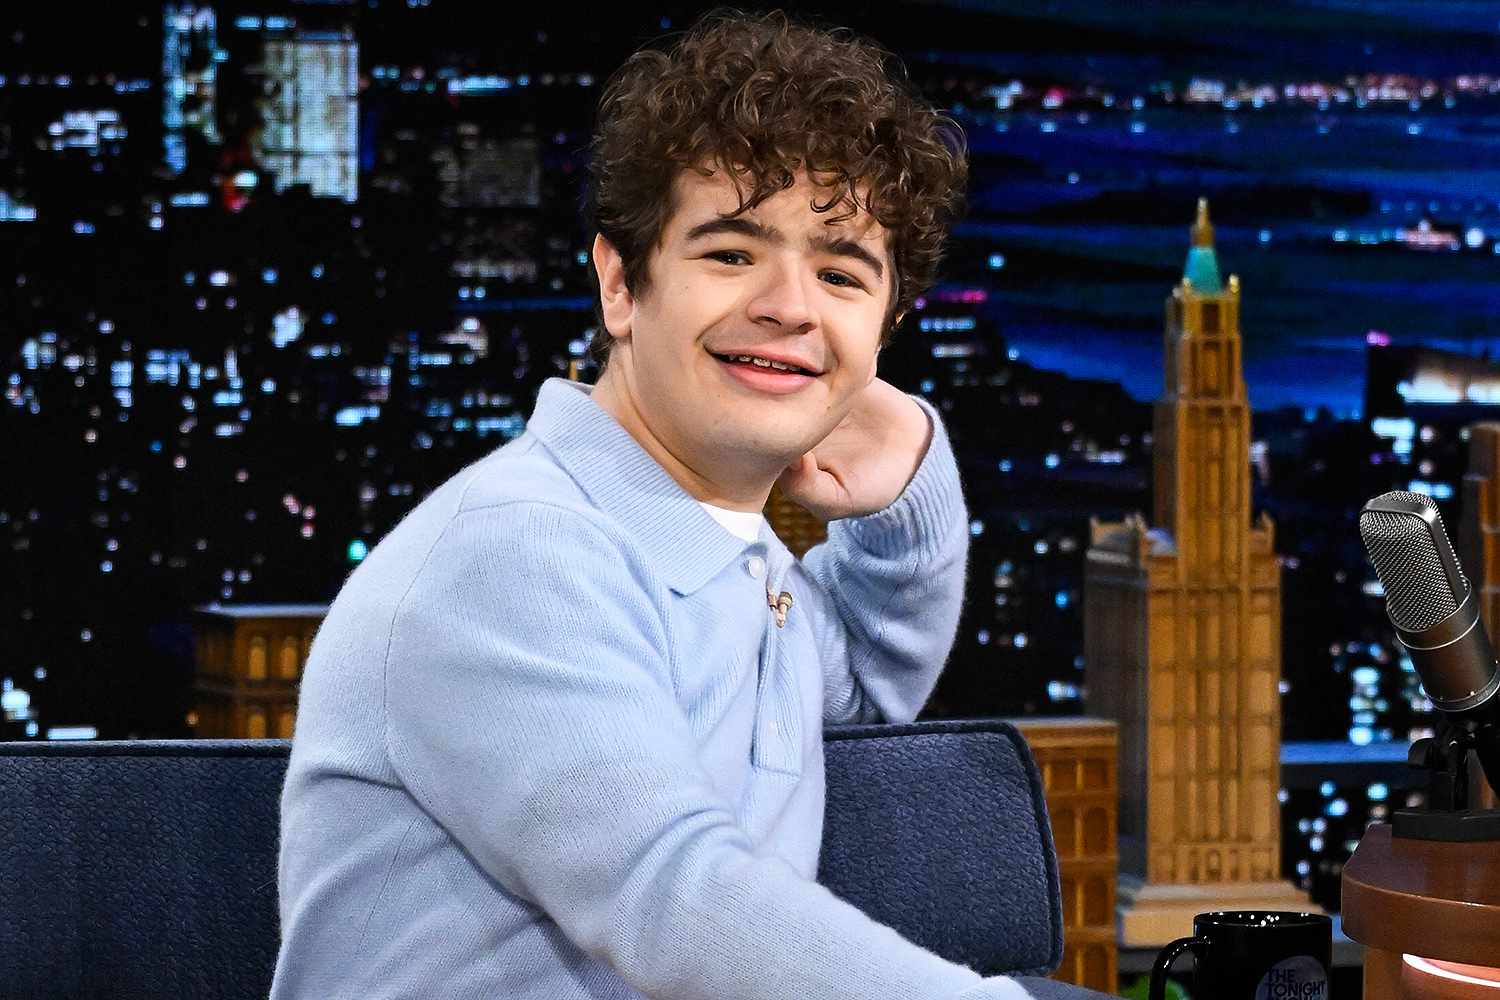 gaten-matarazzo-spotted-filming-final-season-of-stranger-things-looking-all-grown-up